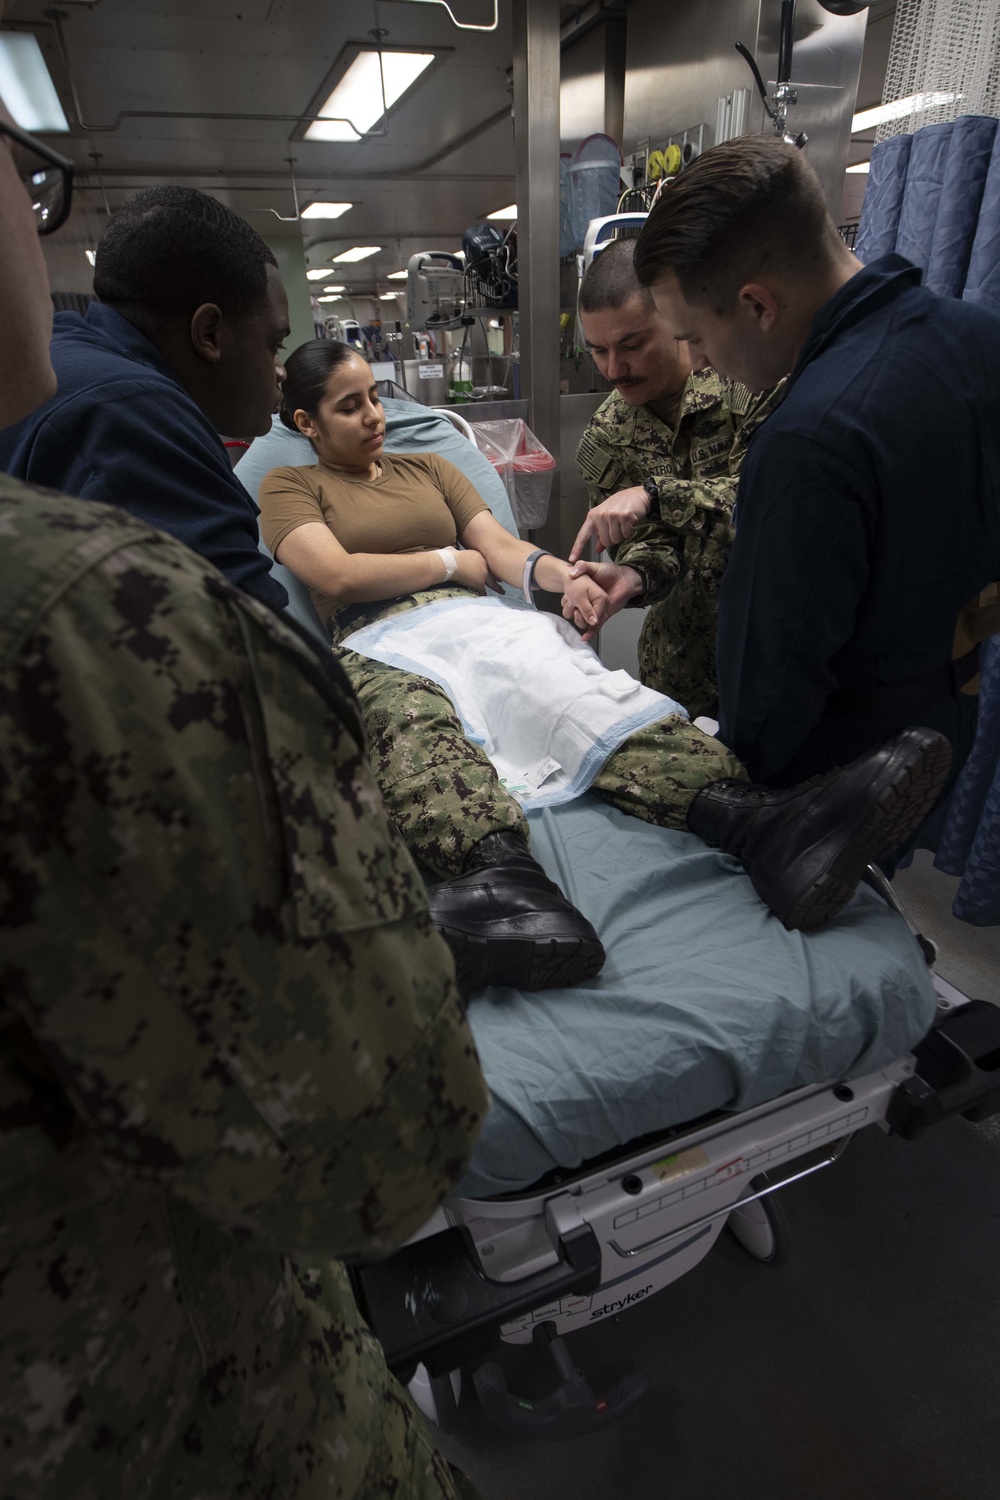 USNS Comfort Trains to Provide Patient Care in New York City